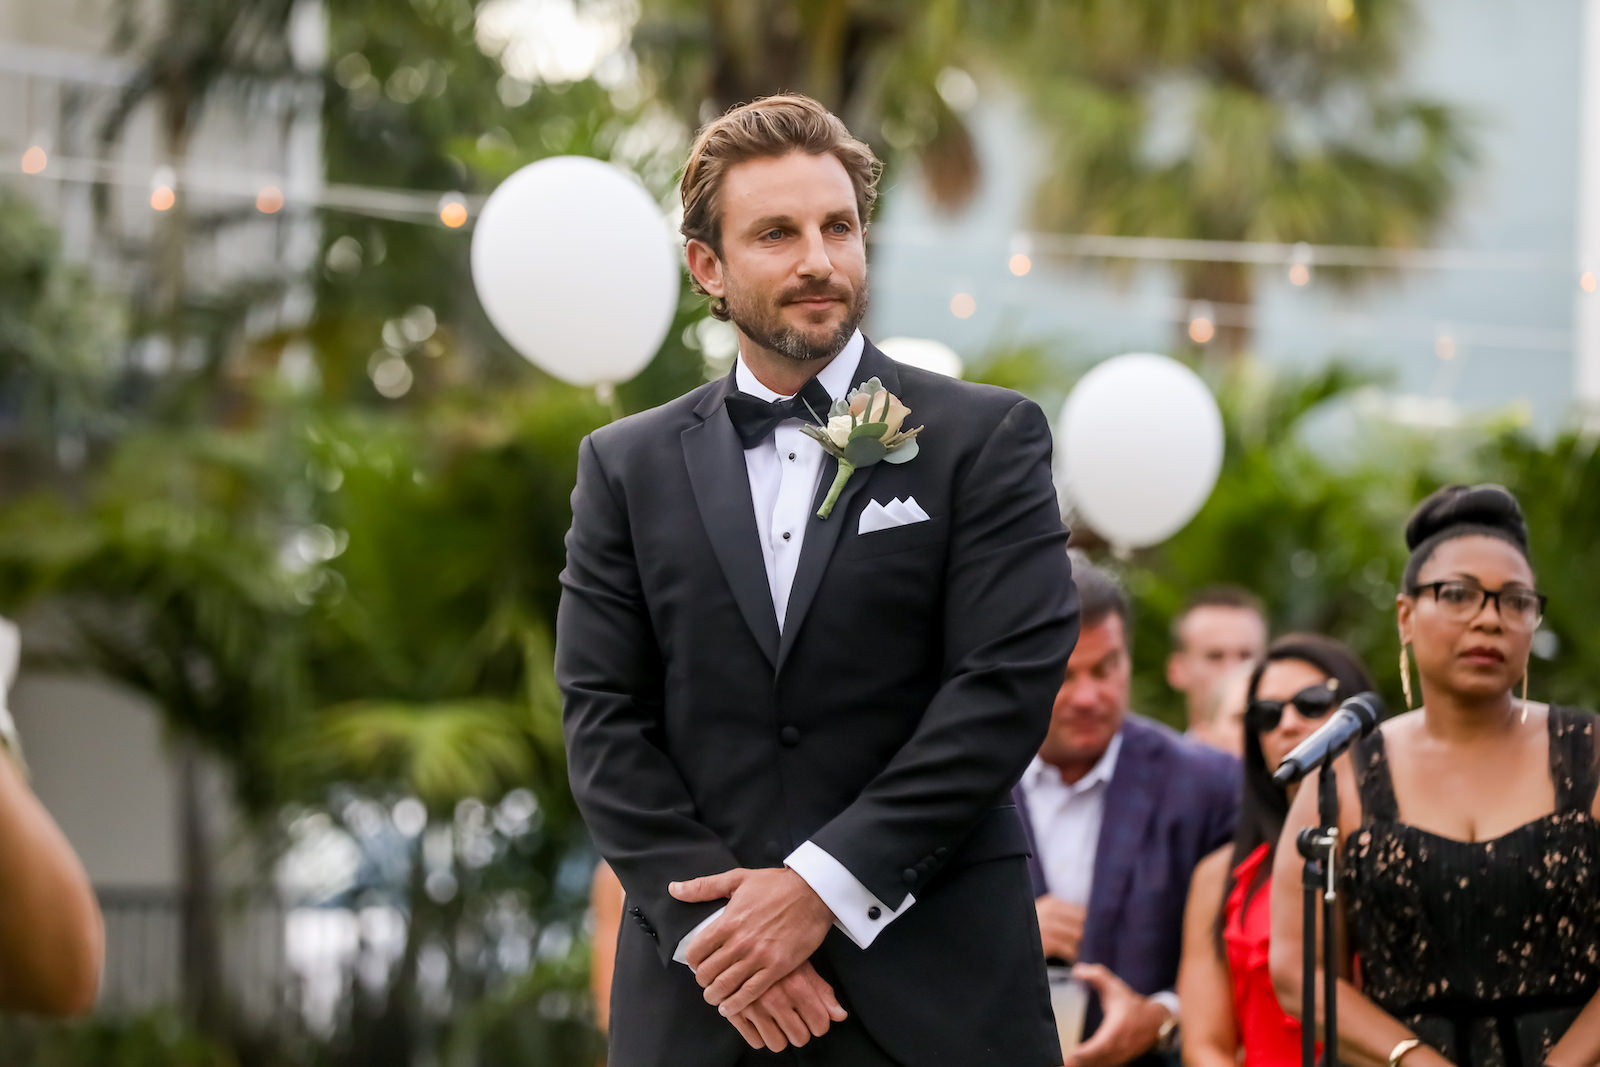 Sarasota Groom Stands at Alter Seeing Bride For First Time, With Tropical Inspired Boutonnière | Sarasota Wedding Planner Kelly Kennedy Weddings | Florida Wedding Photographer Lifelong Photography Studio